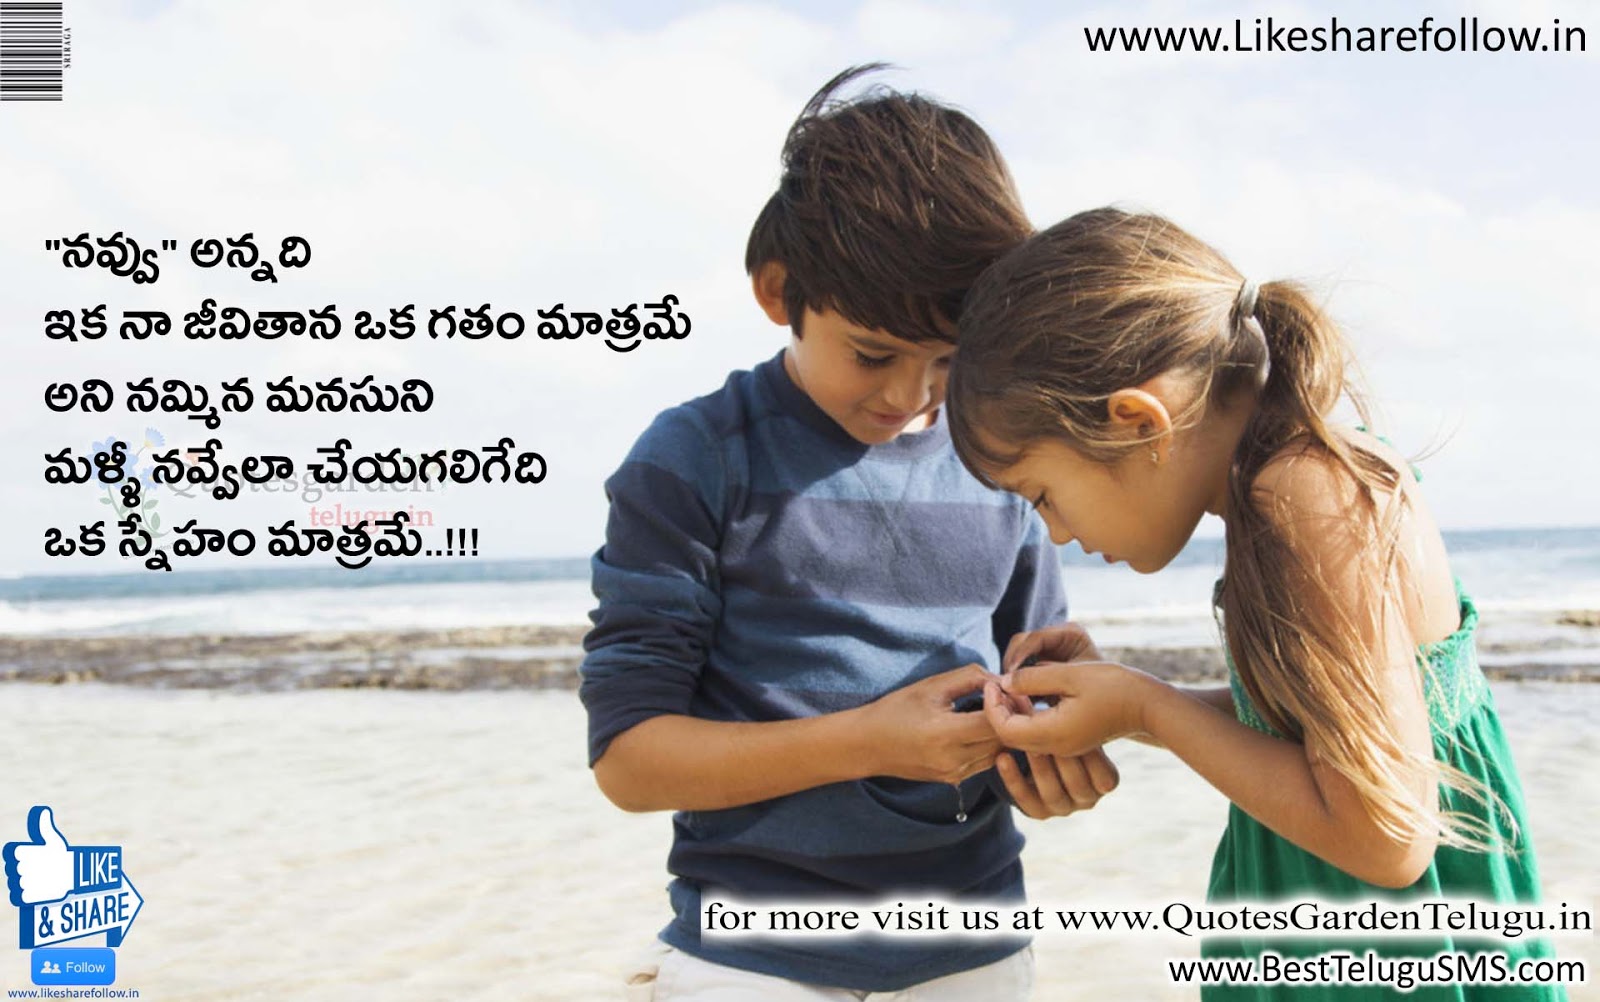 Best Heart touching friendship quotes in telugu | Like Share Follow